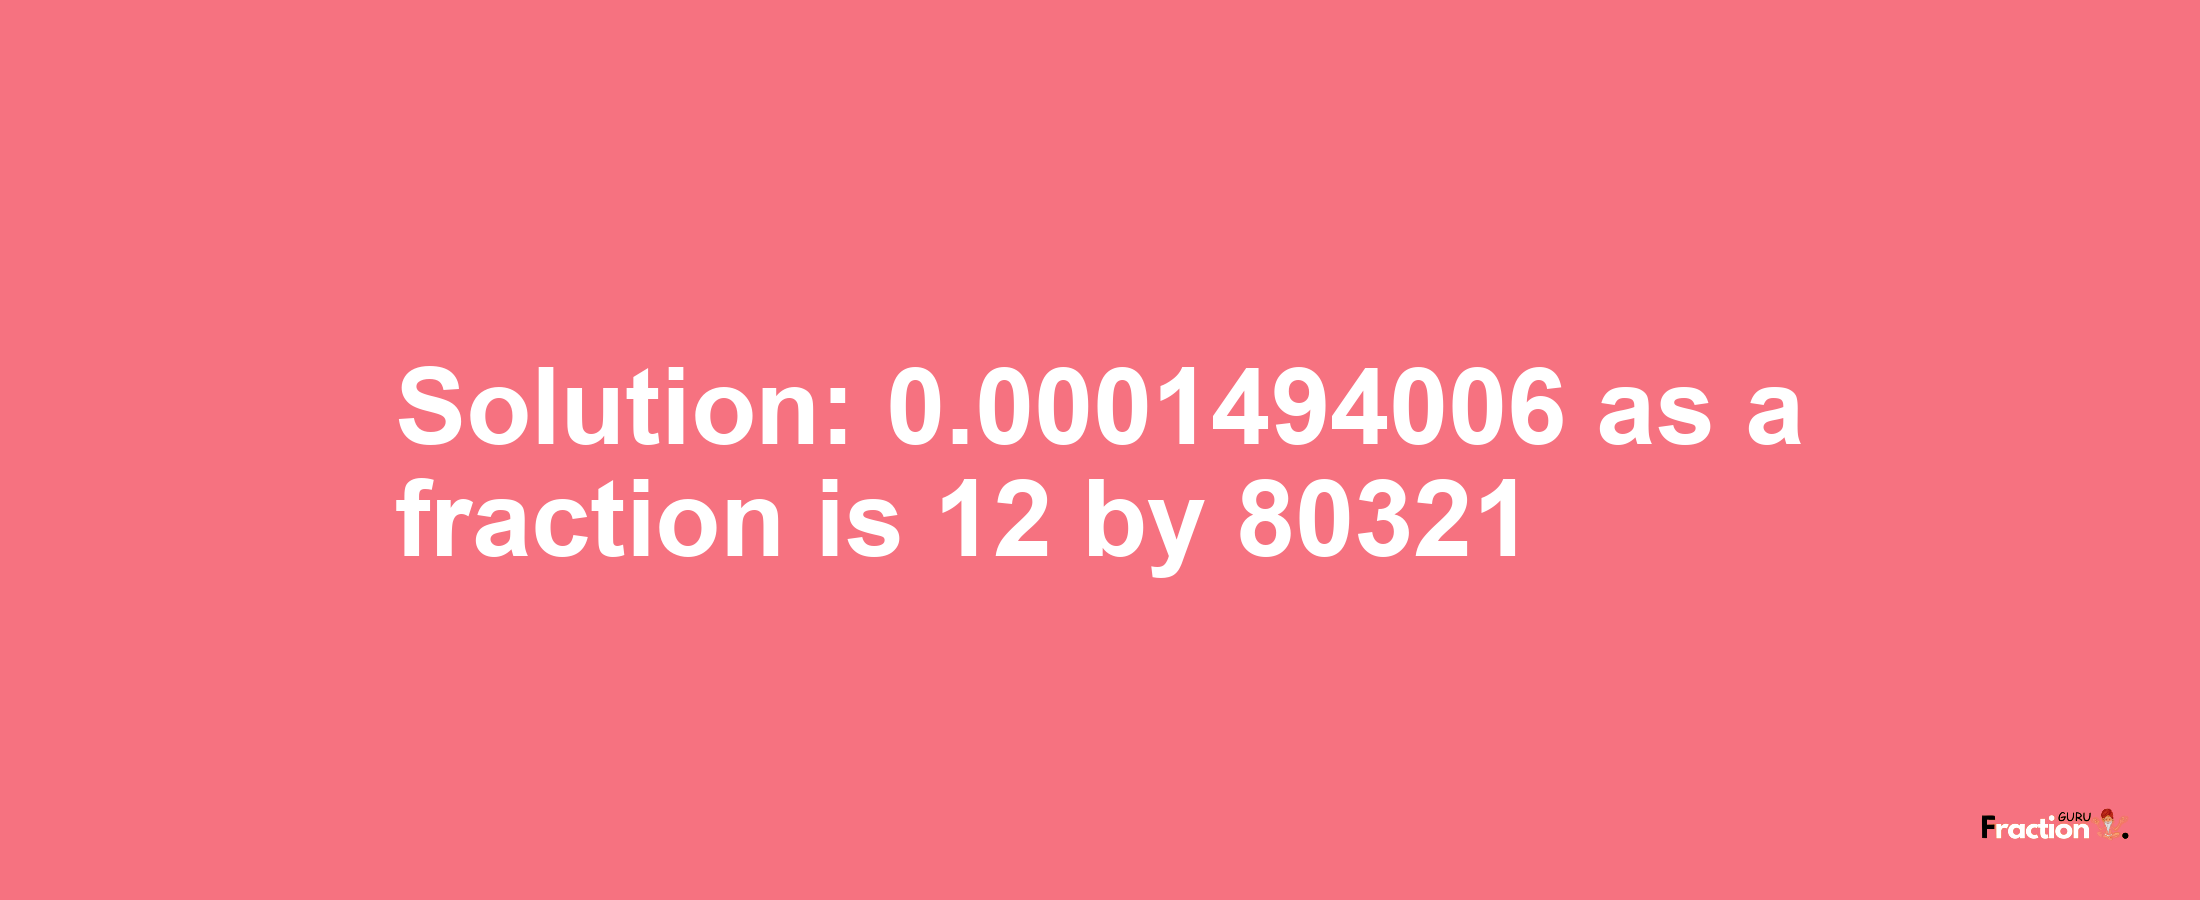 Solution:0.0001494006 as a fraction is 12/80321